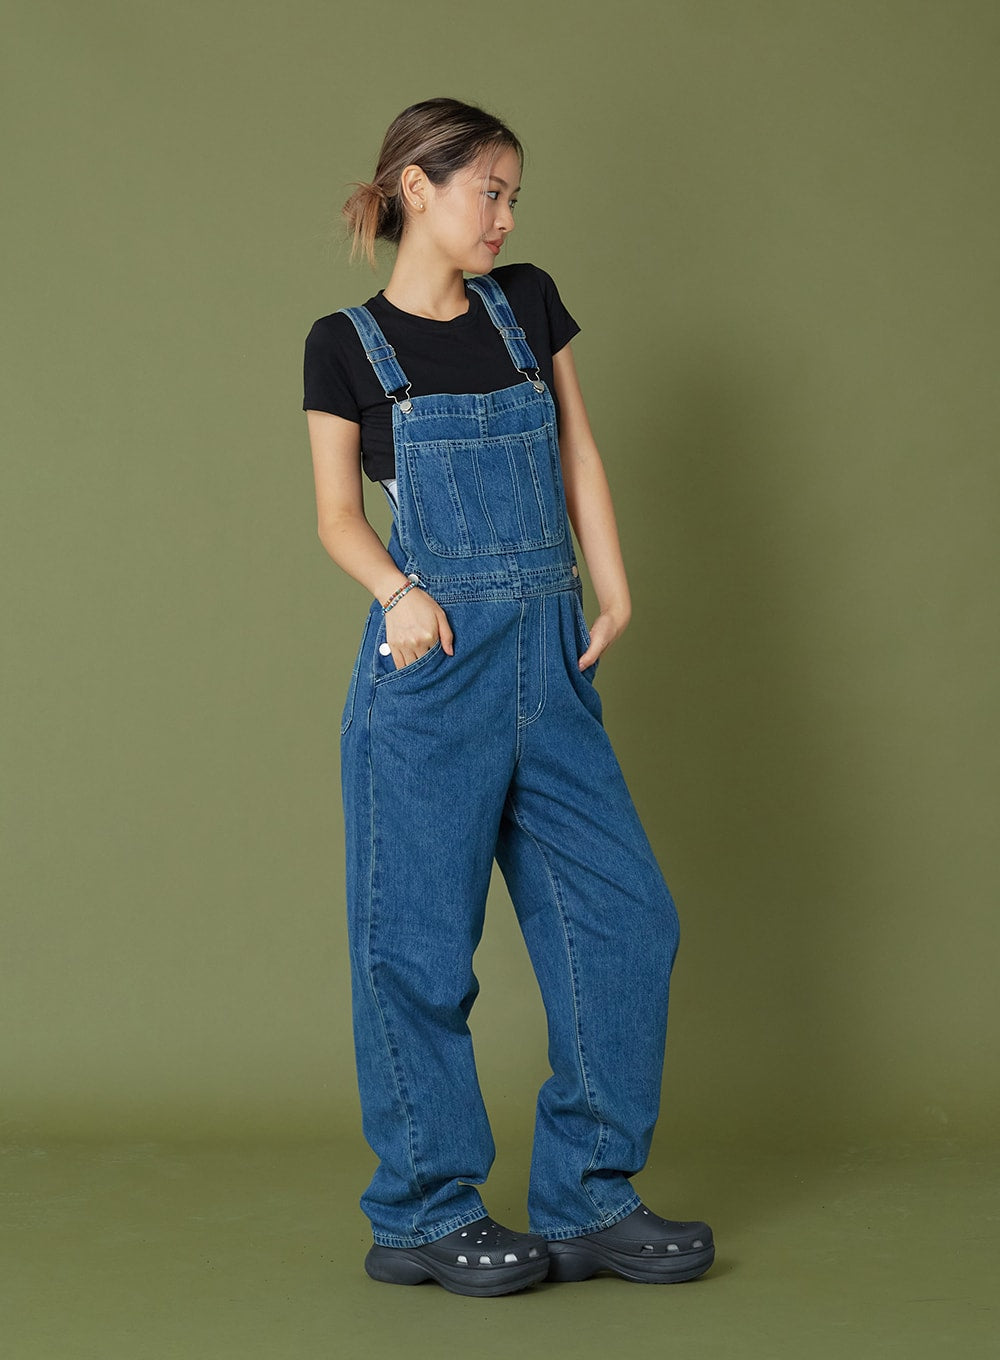 Loose women's jeans overall - lemmlly